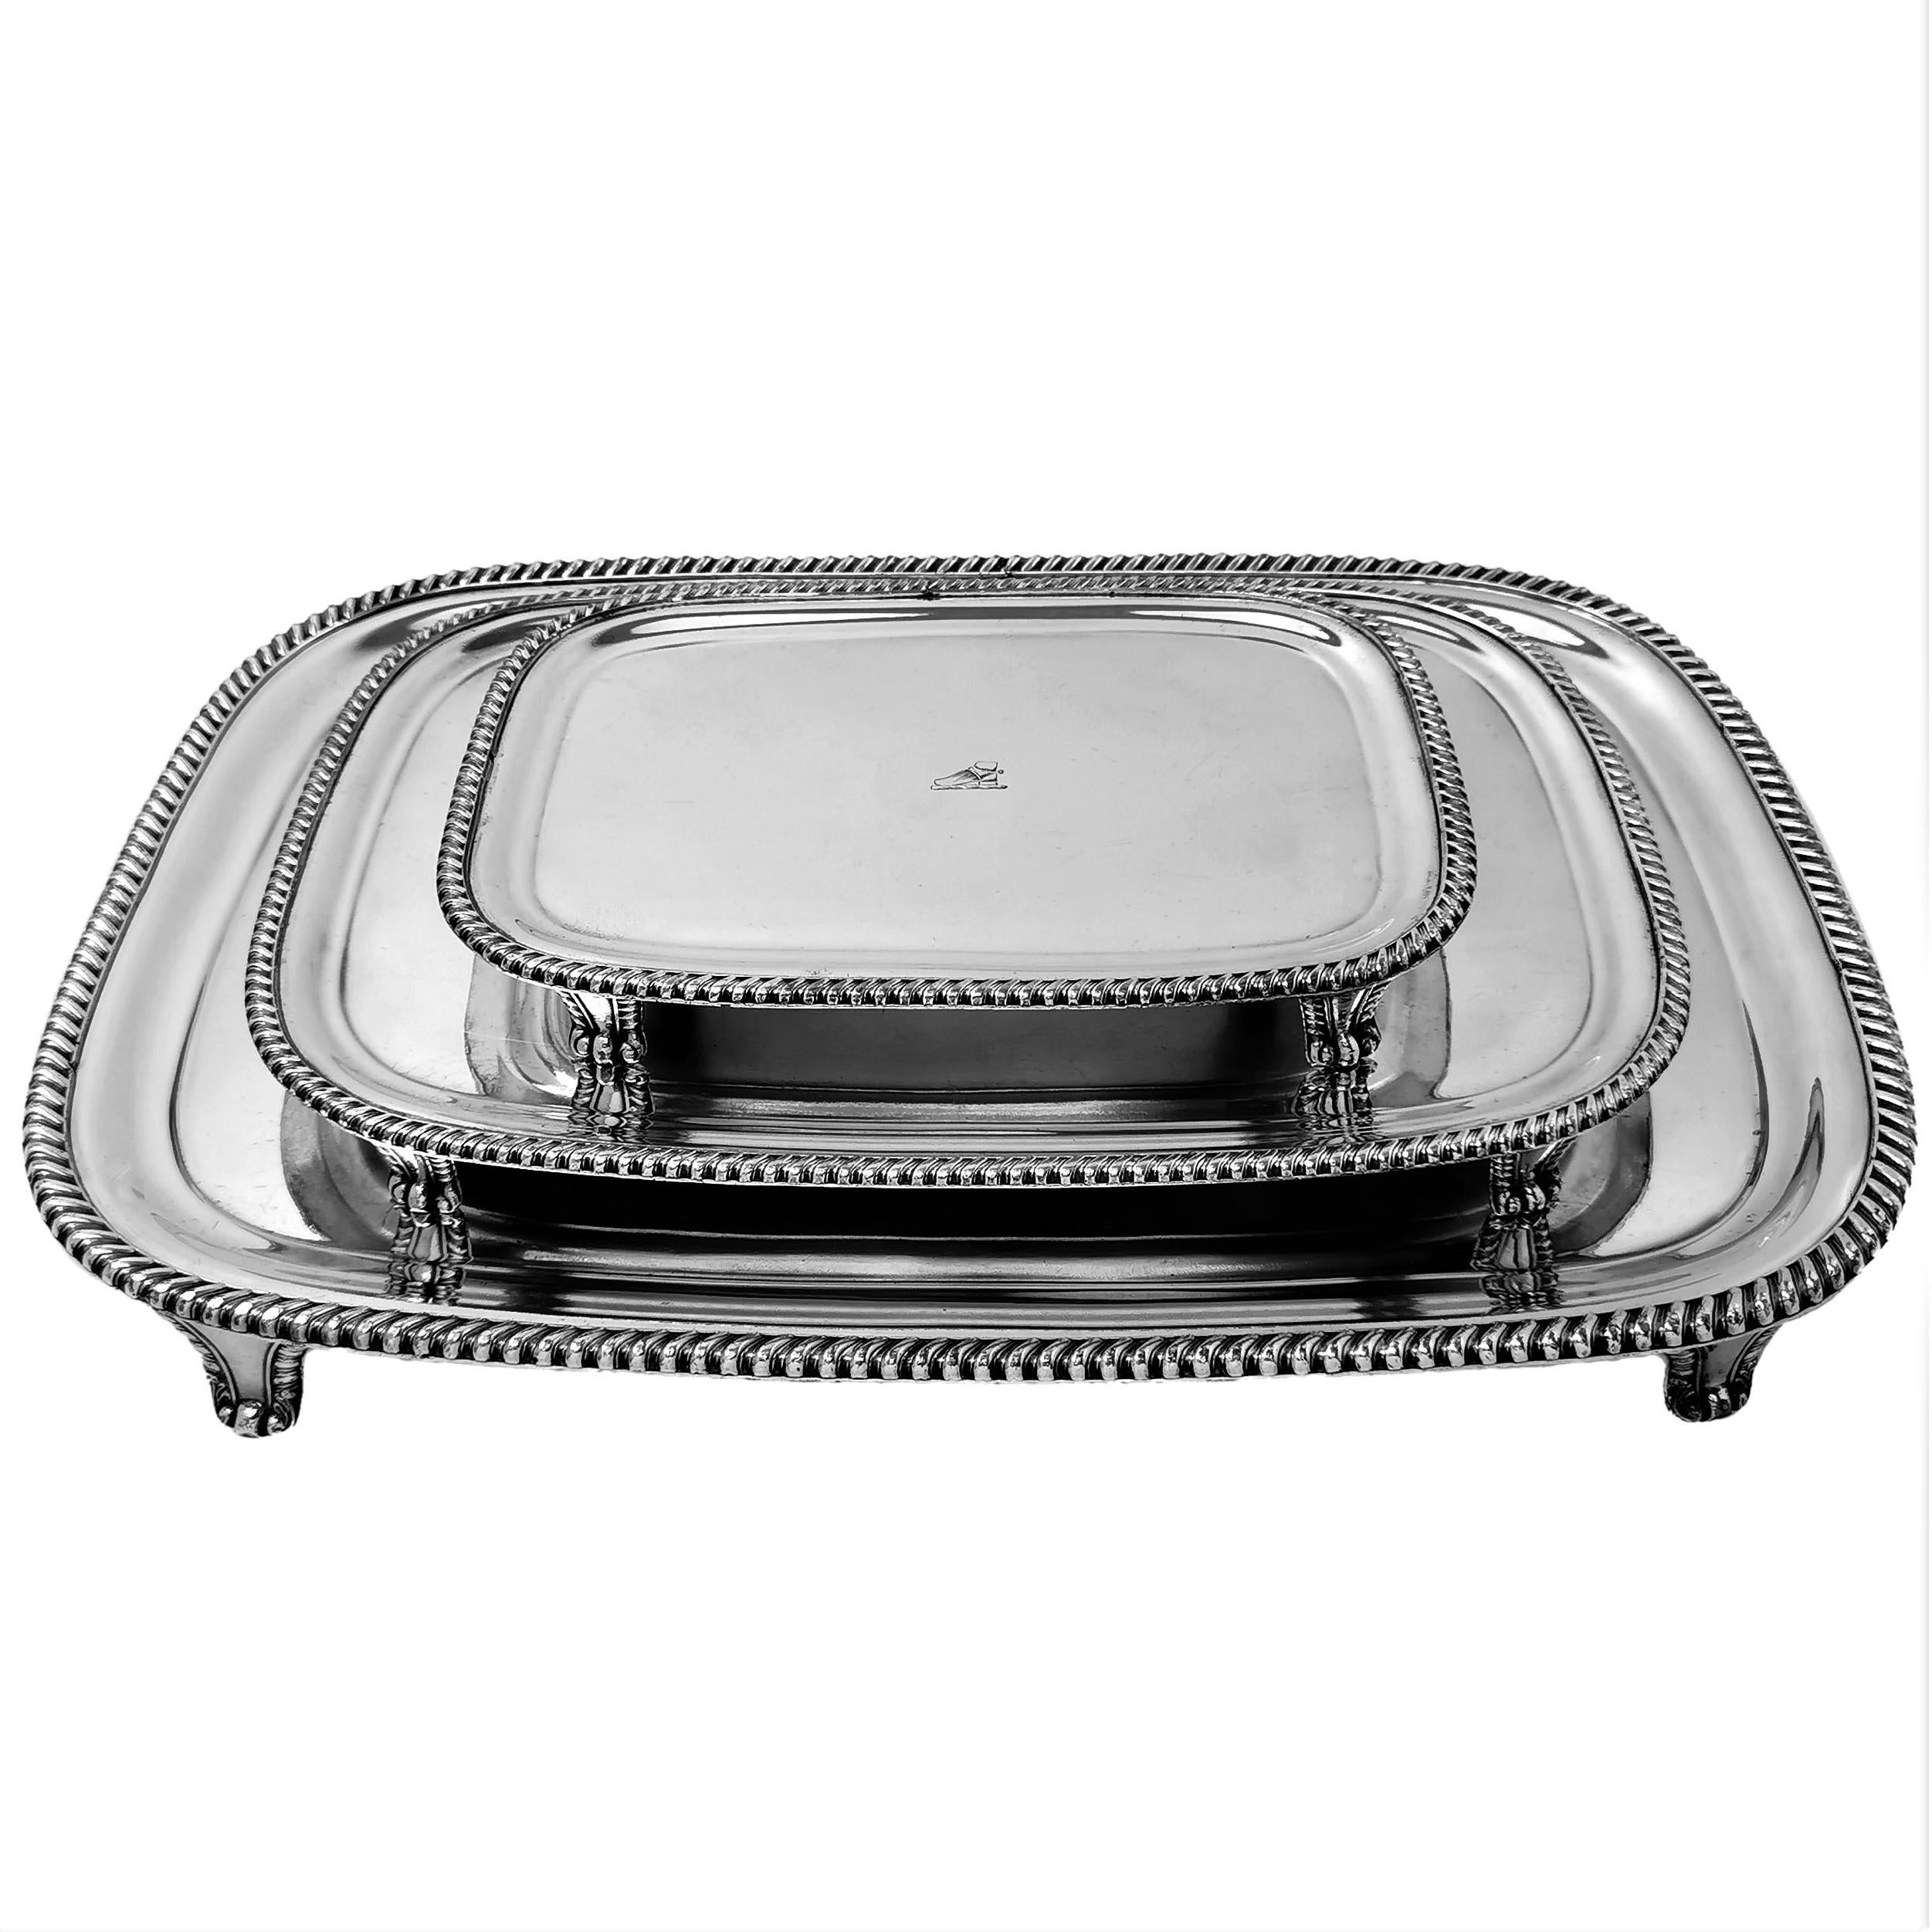 A set of Three Antique Old Sheffield silver plate Platters with curved rectangular forms. Each Tray has a classic gadroon edge border and each has a small crest engraved on the centre. Each Tray stands on four feet.

Made in Sheffield, England in